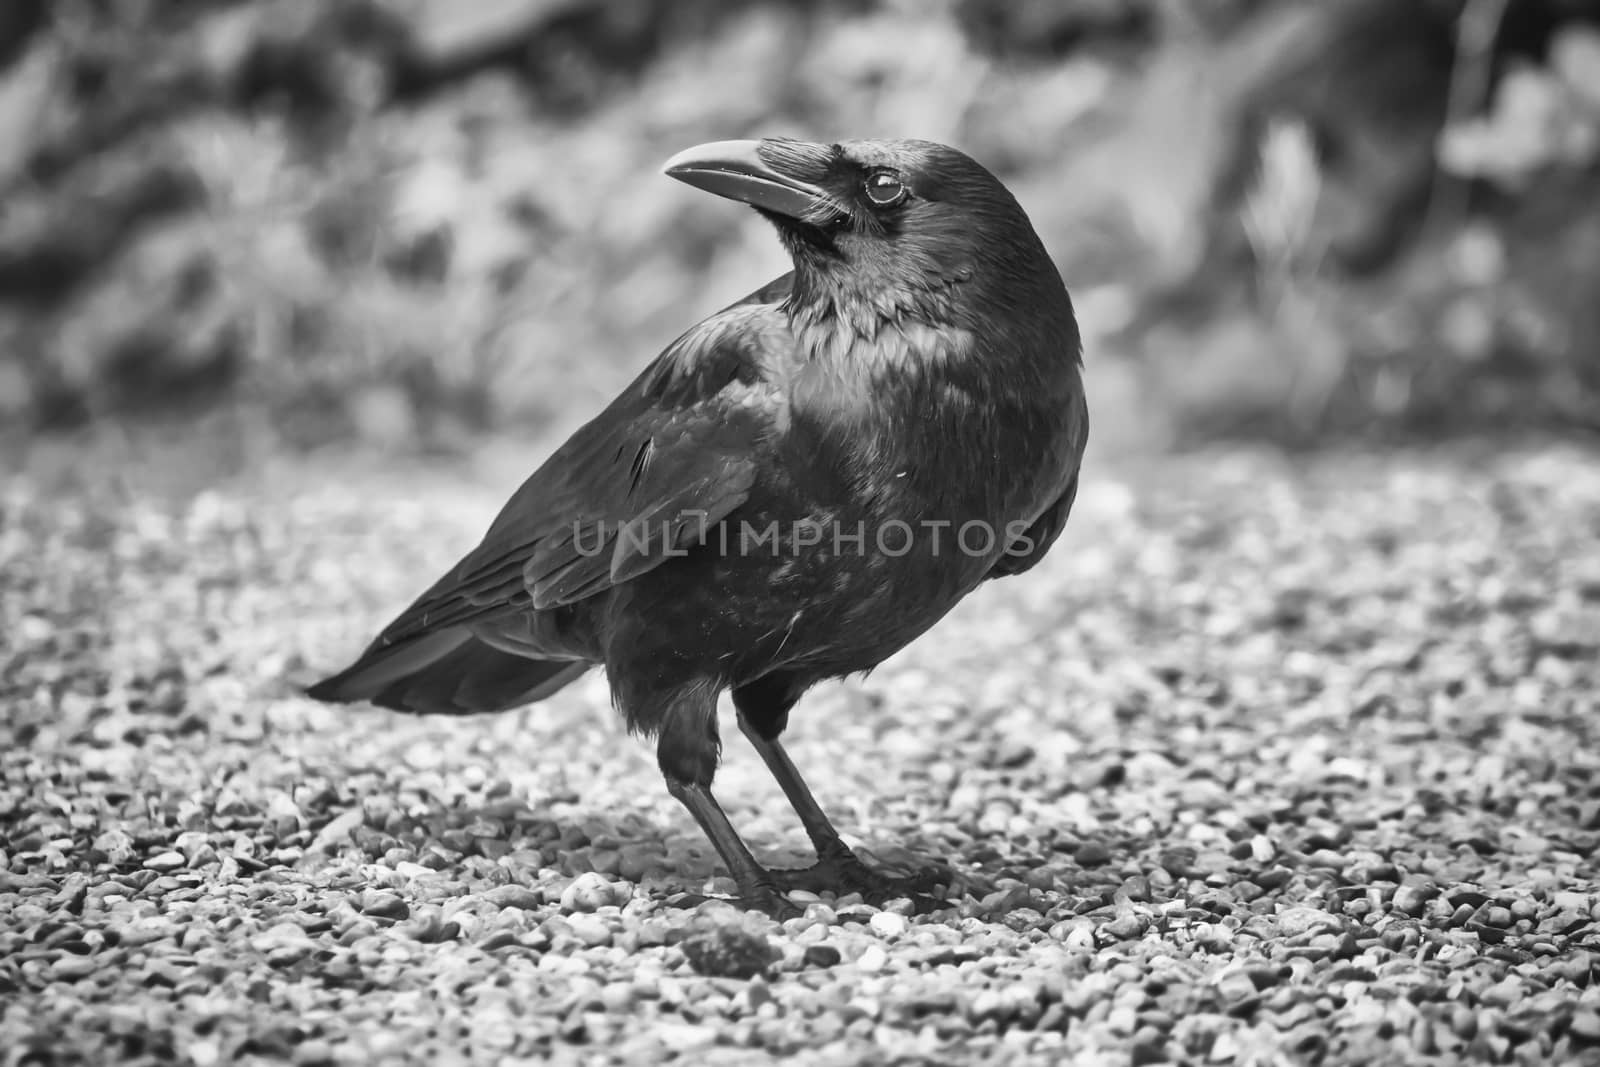 Black and white common raven, corvus corax, standing on the ground